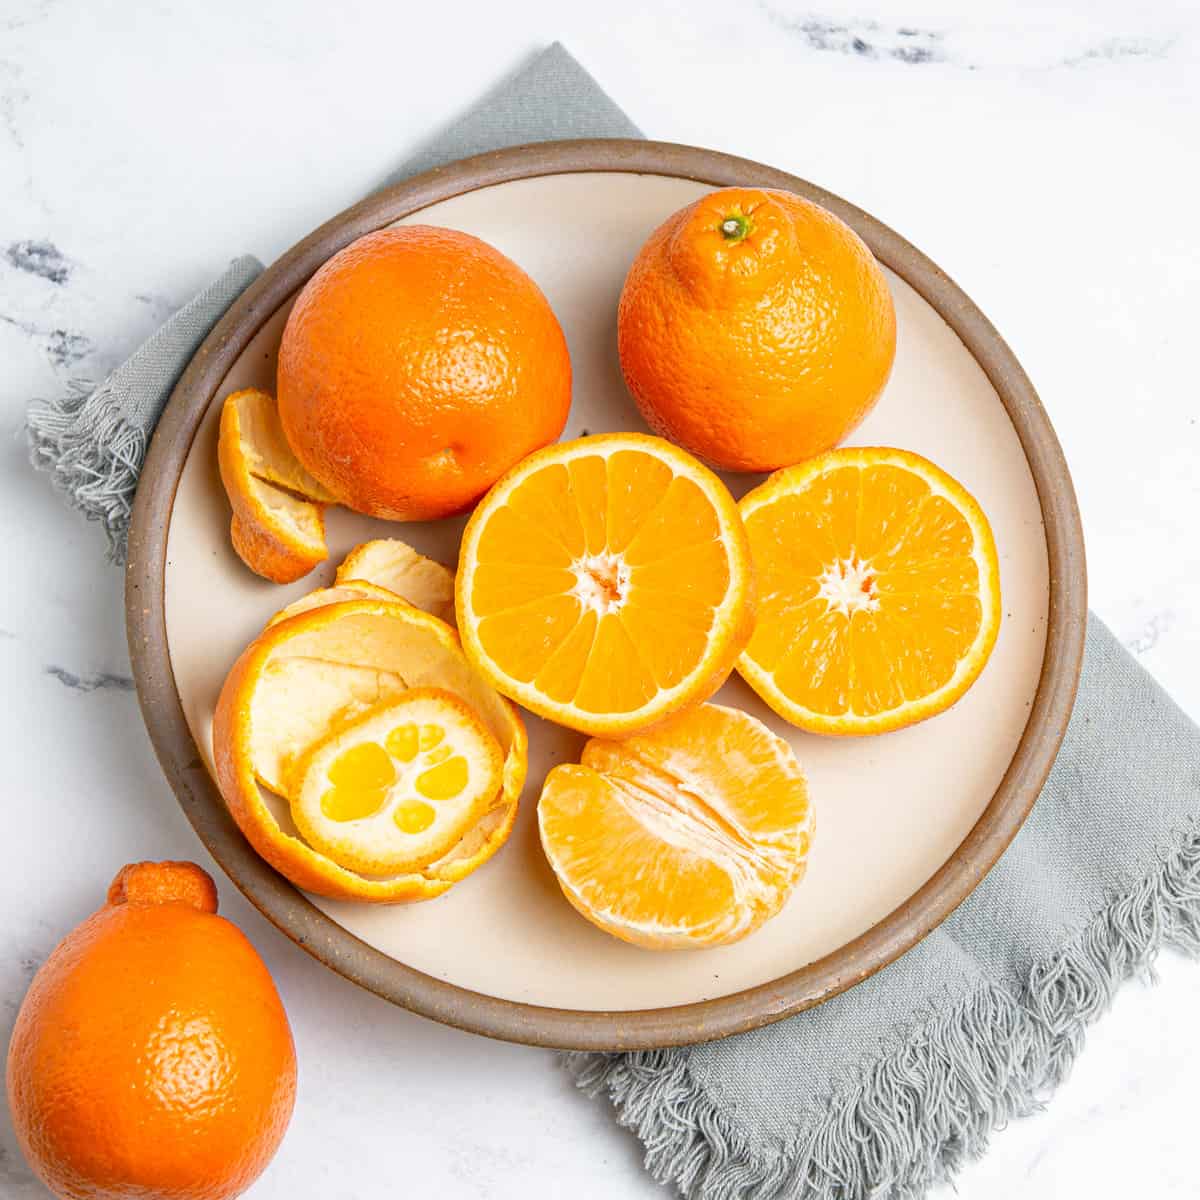 Sliced and unsliced oranges in a plate on a kitchen towel.